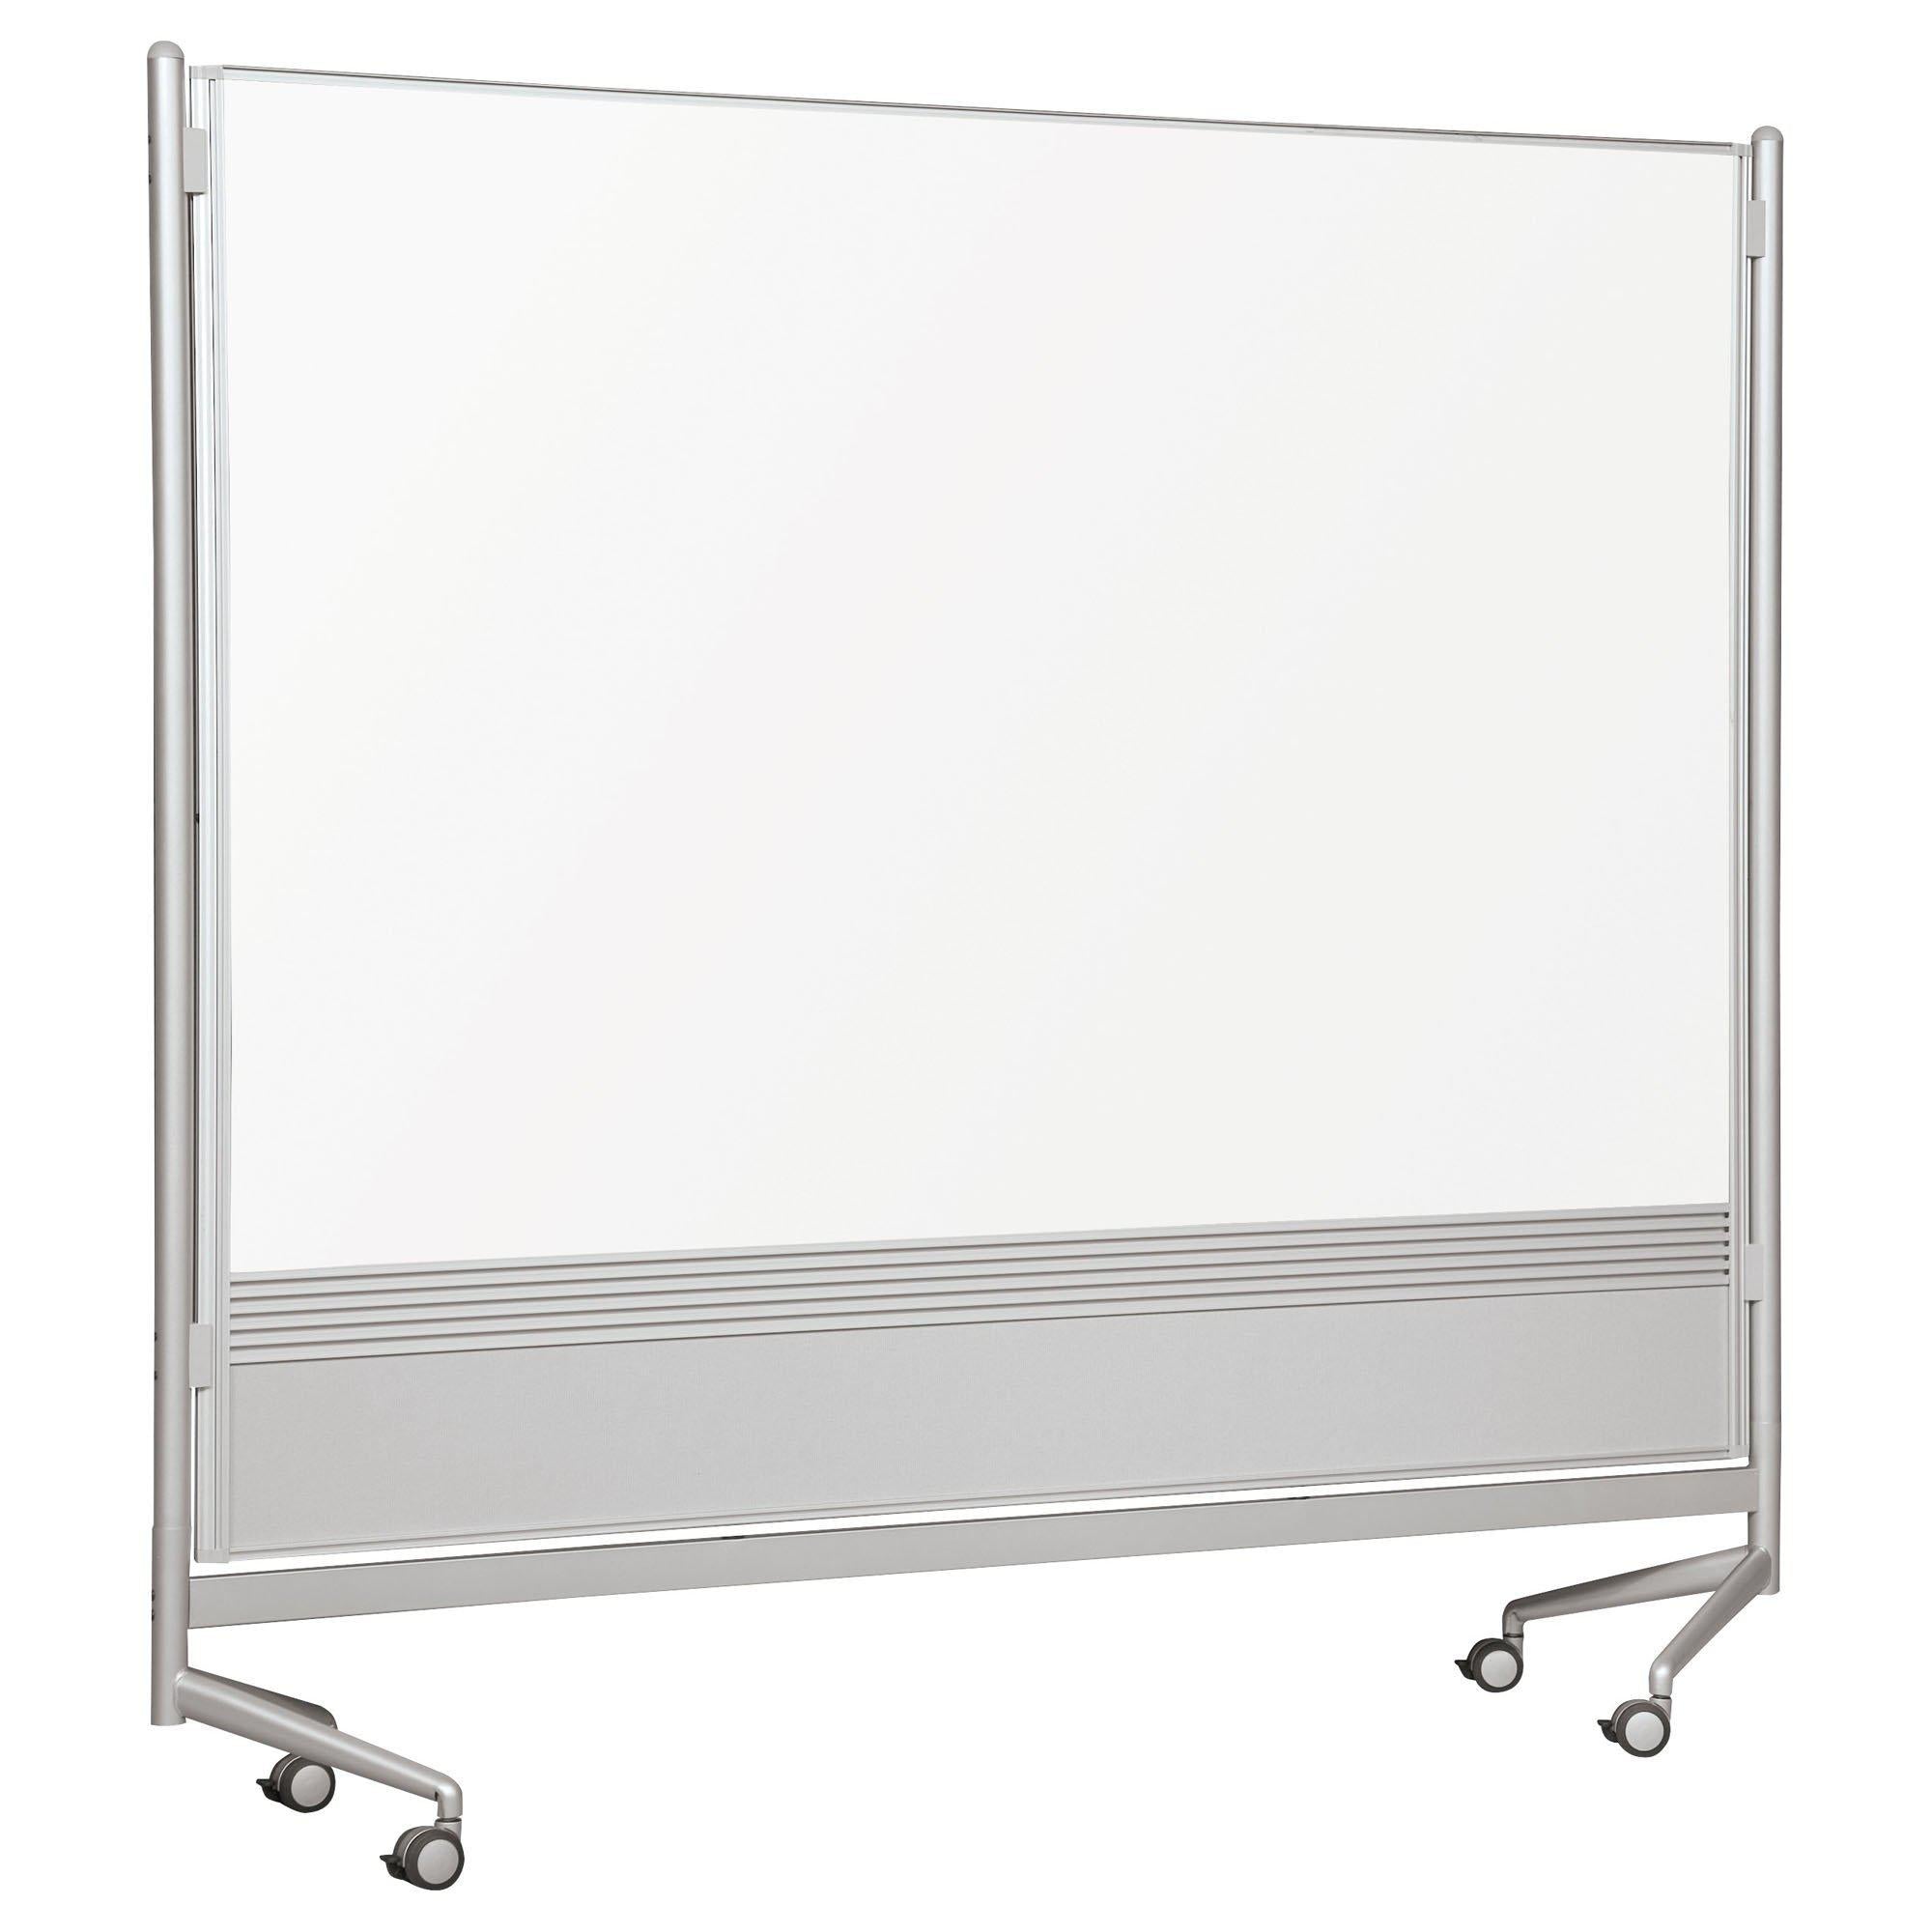 D.O.C. Partitions-Partitions & Display Panels-